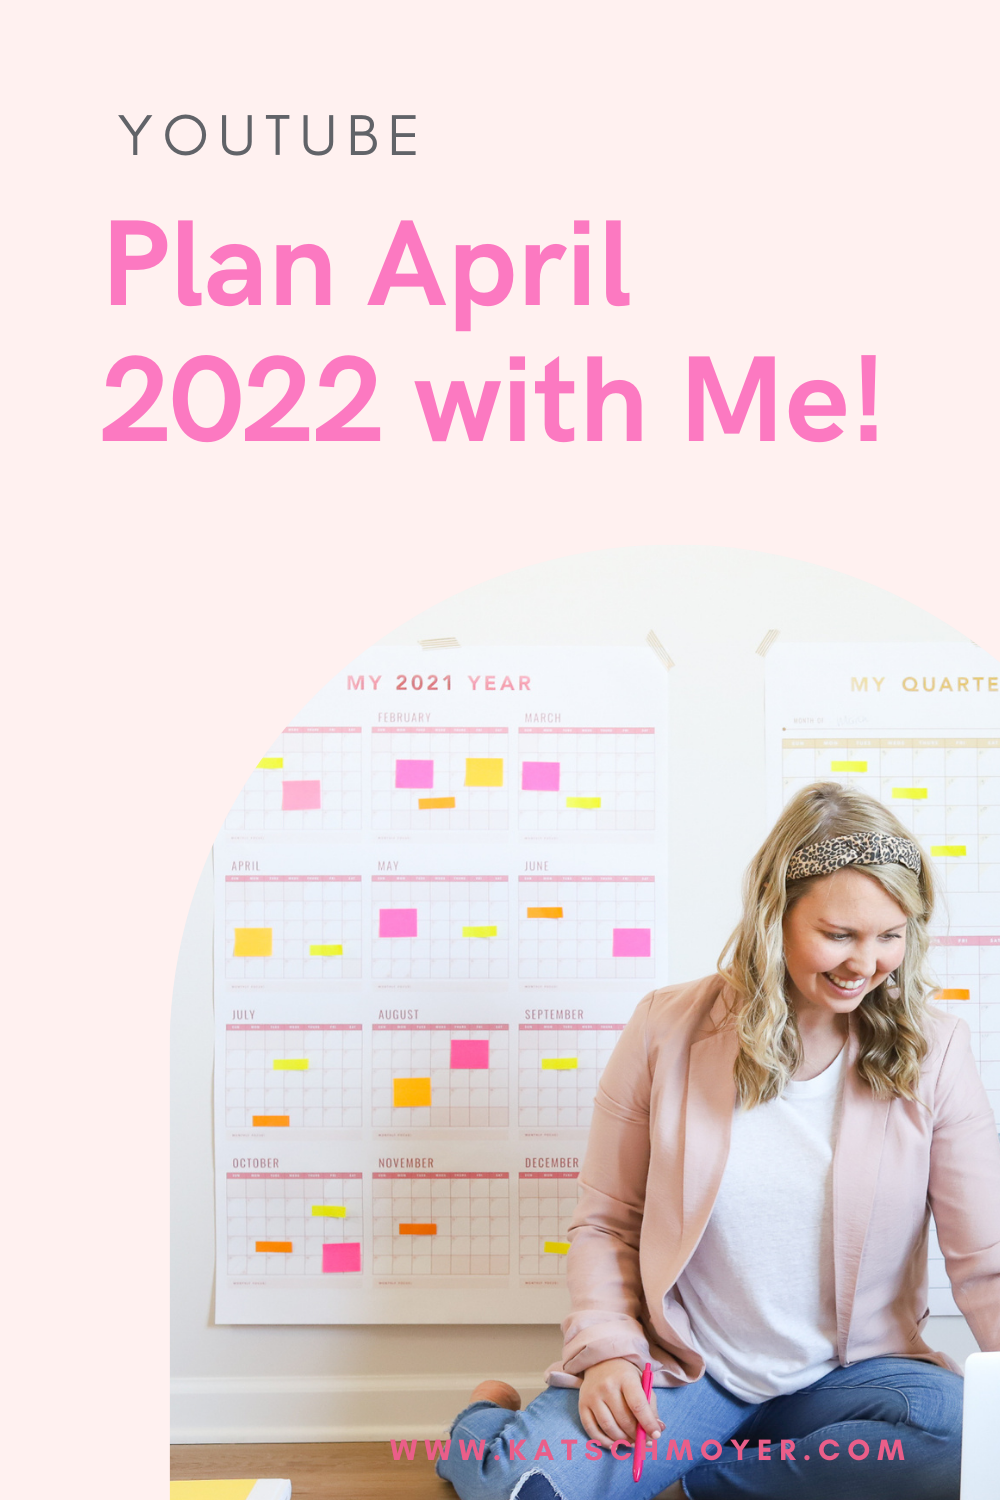 Plan April 2022 with Me on YouTube